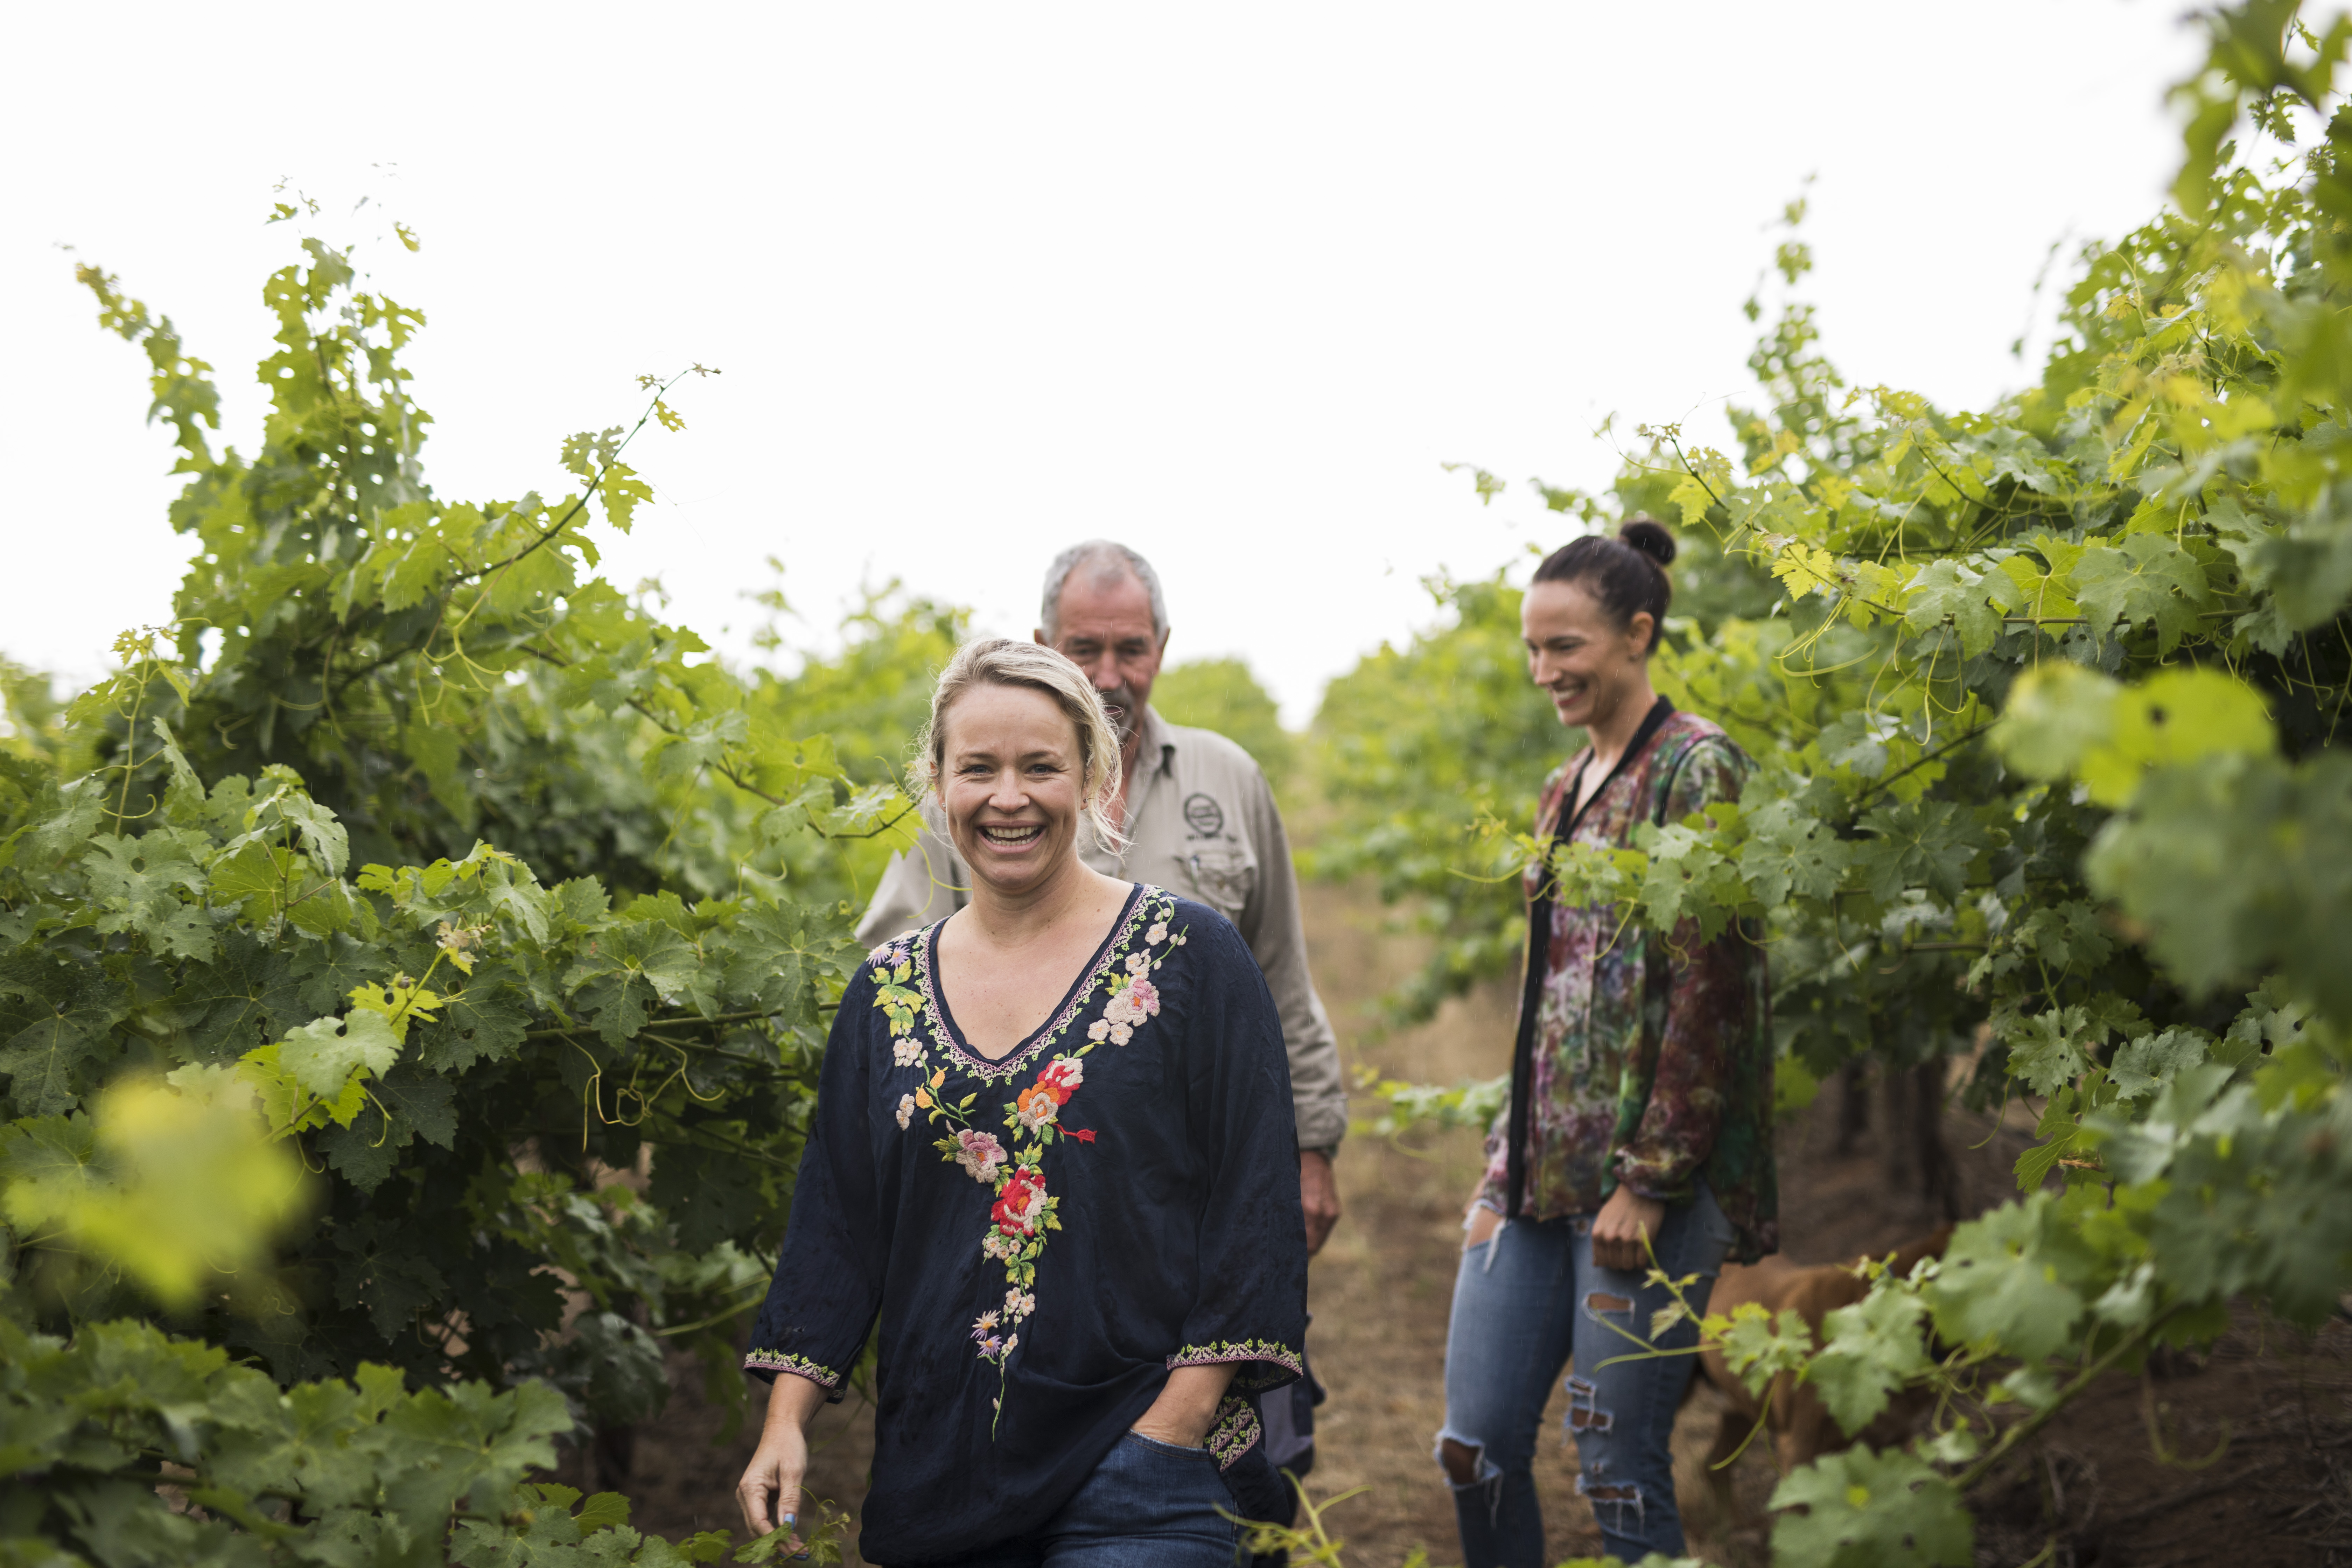 Two women and a man walking in the vineyard